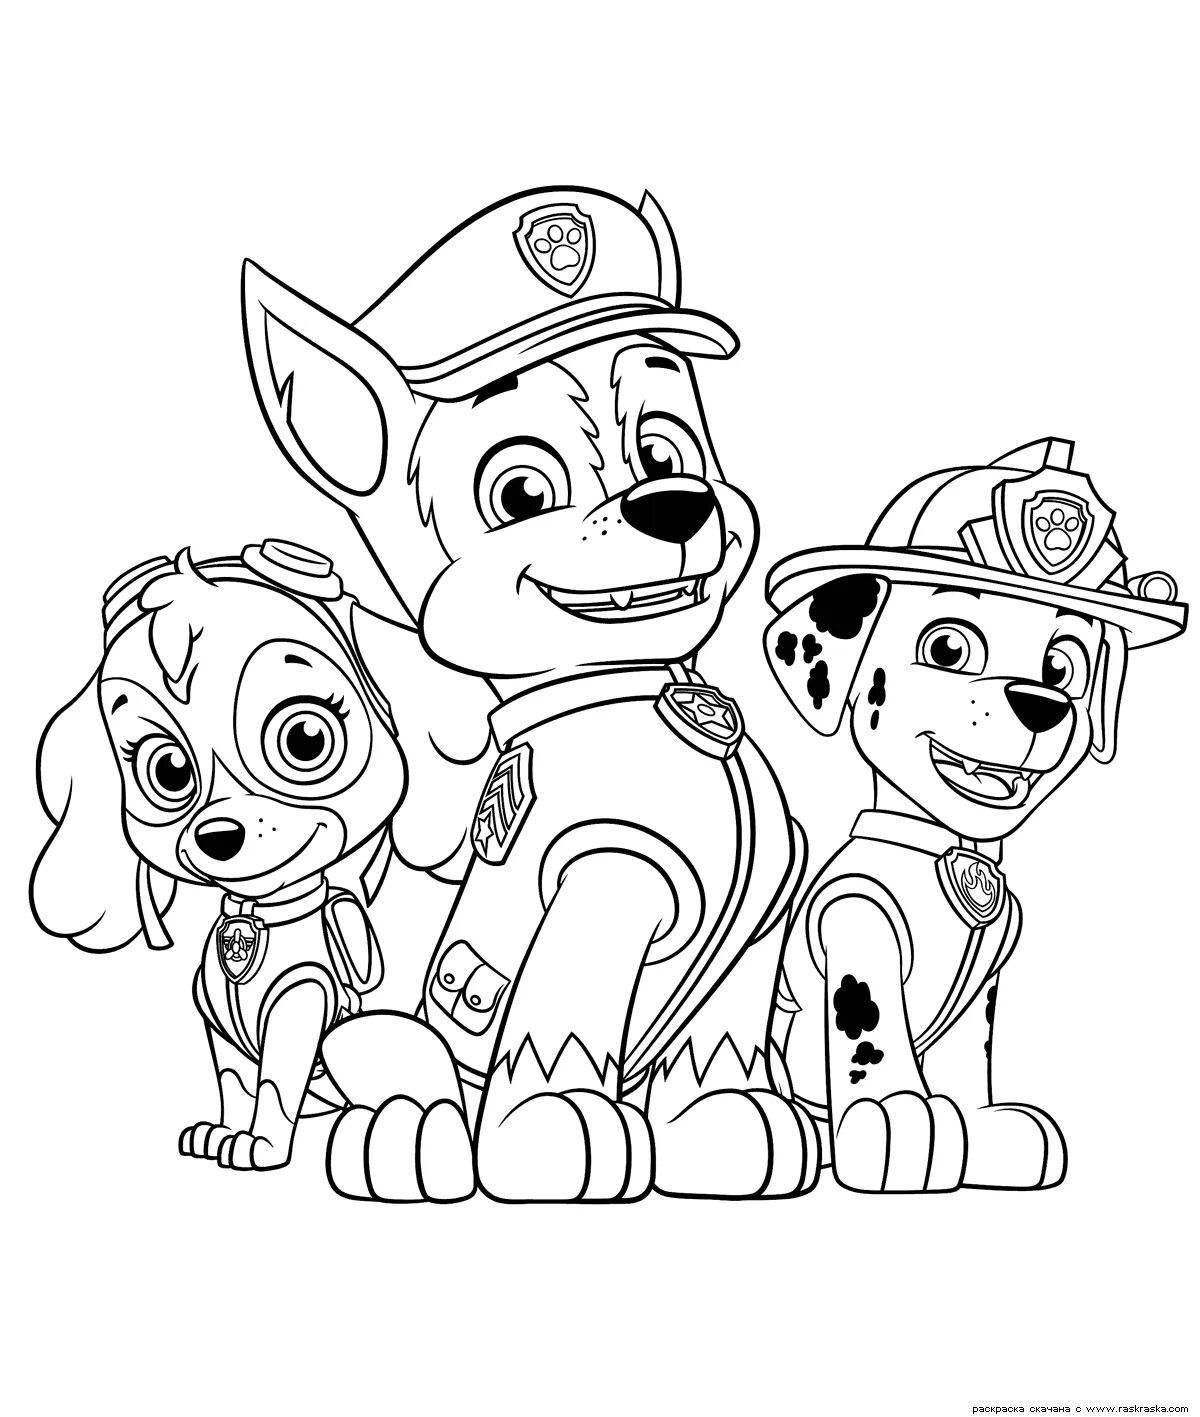 Charming racer coloring page